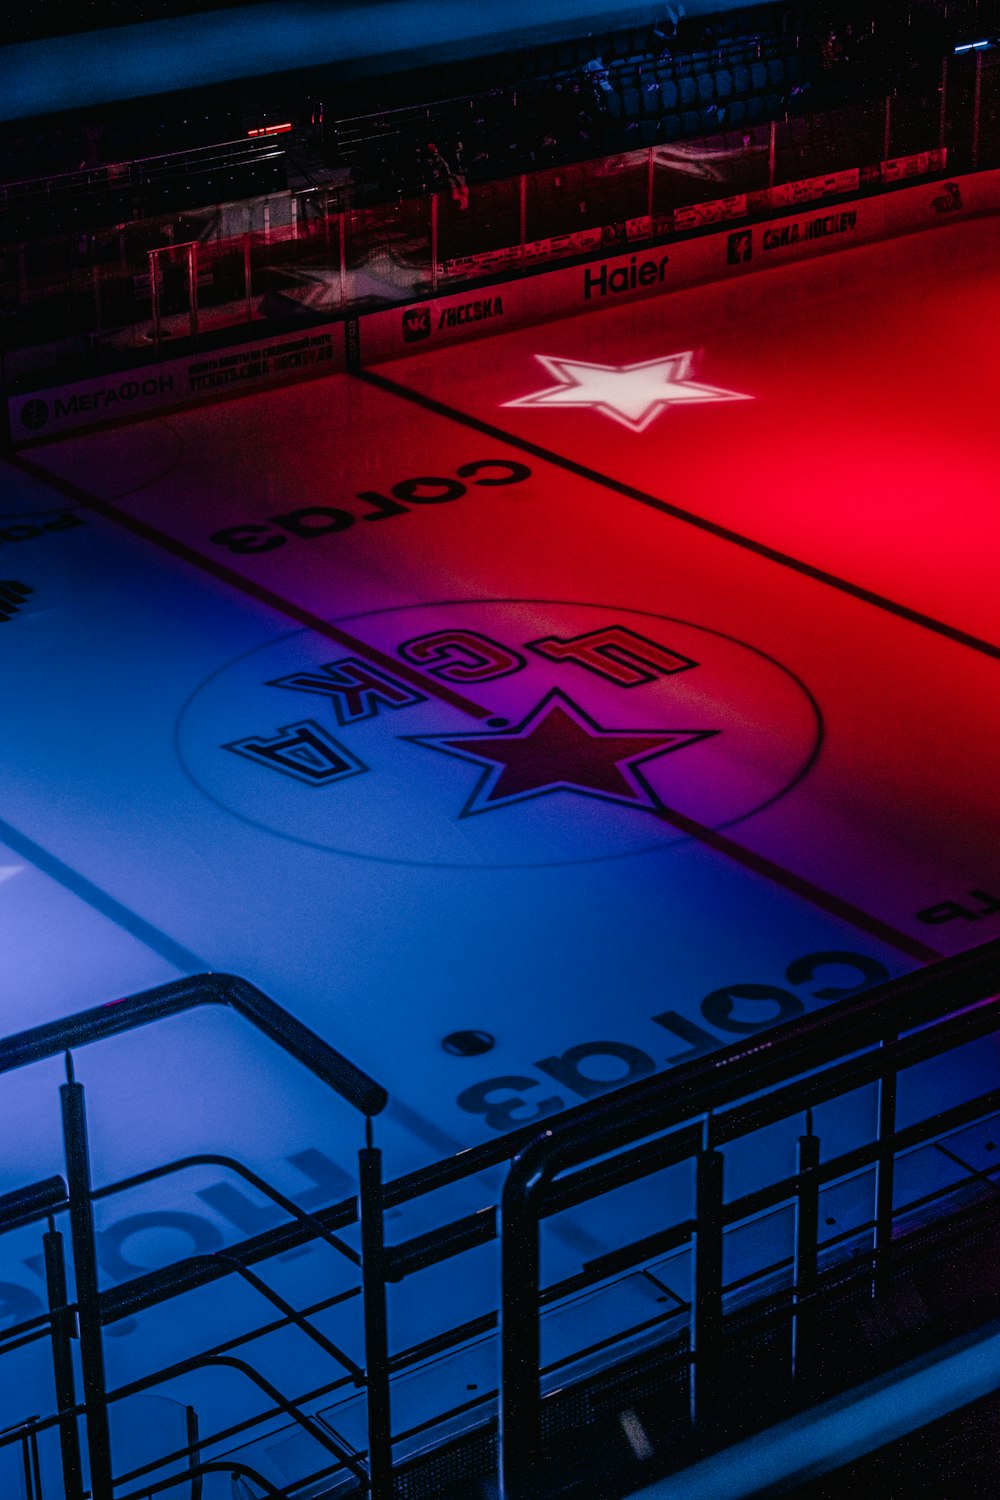 a hockey rink lit up with red, white and blue lights